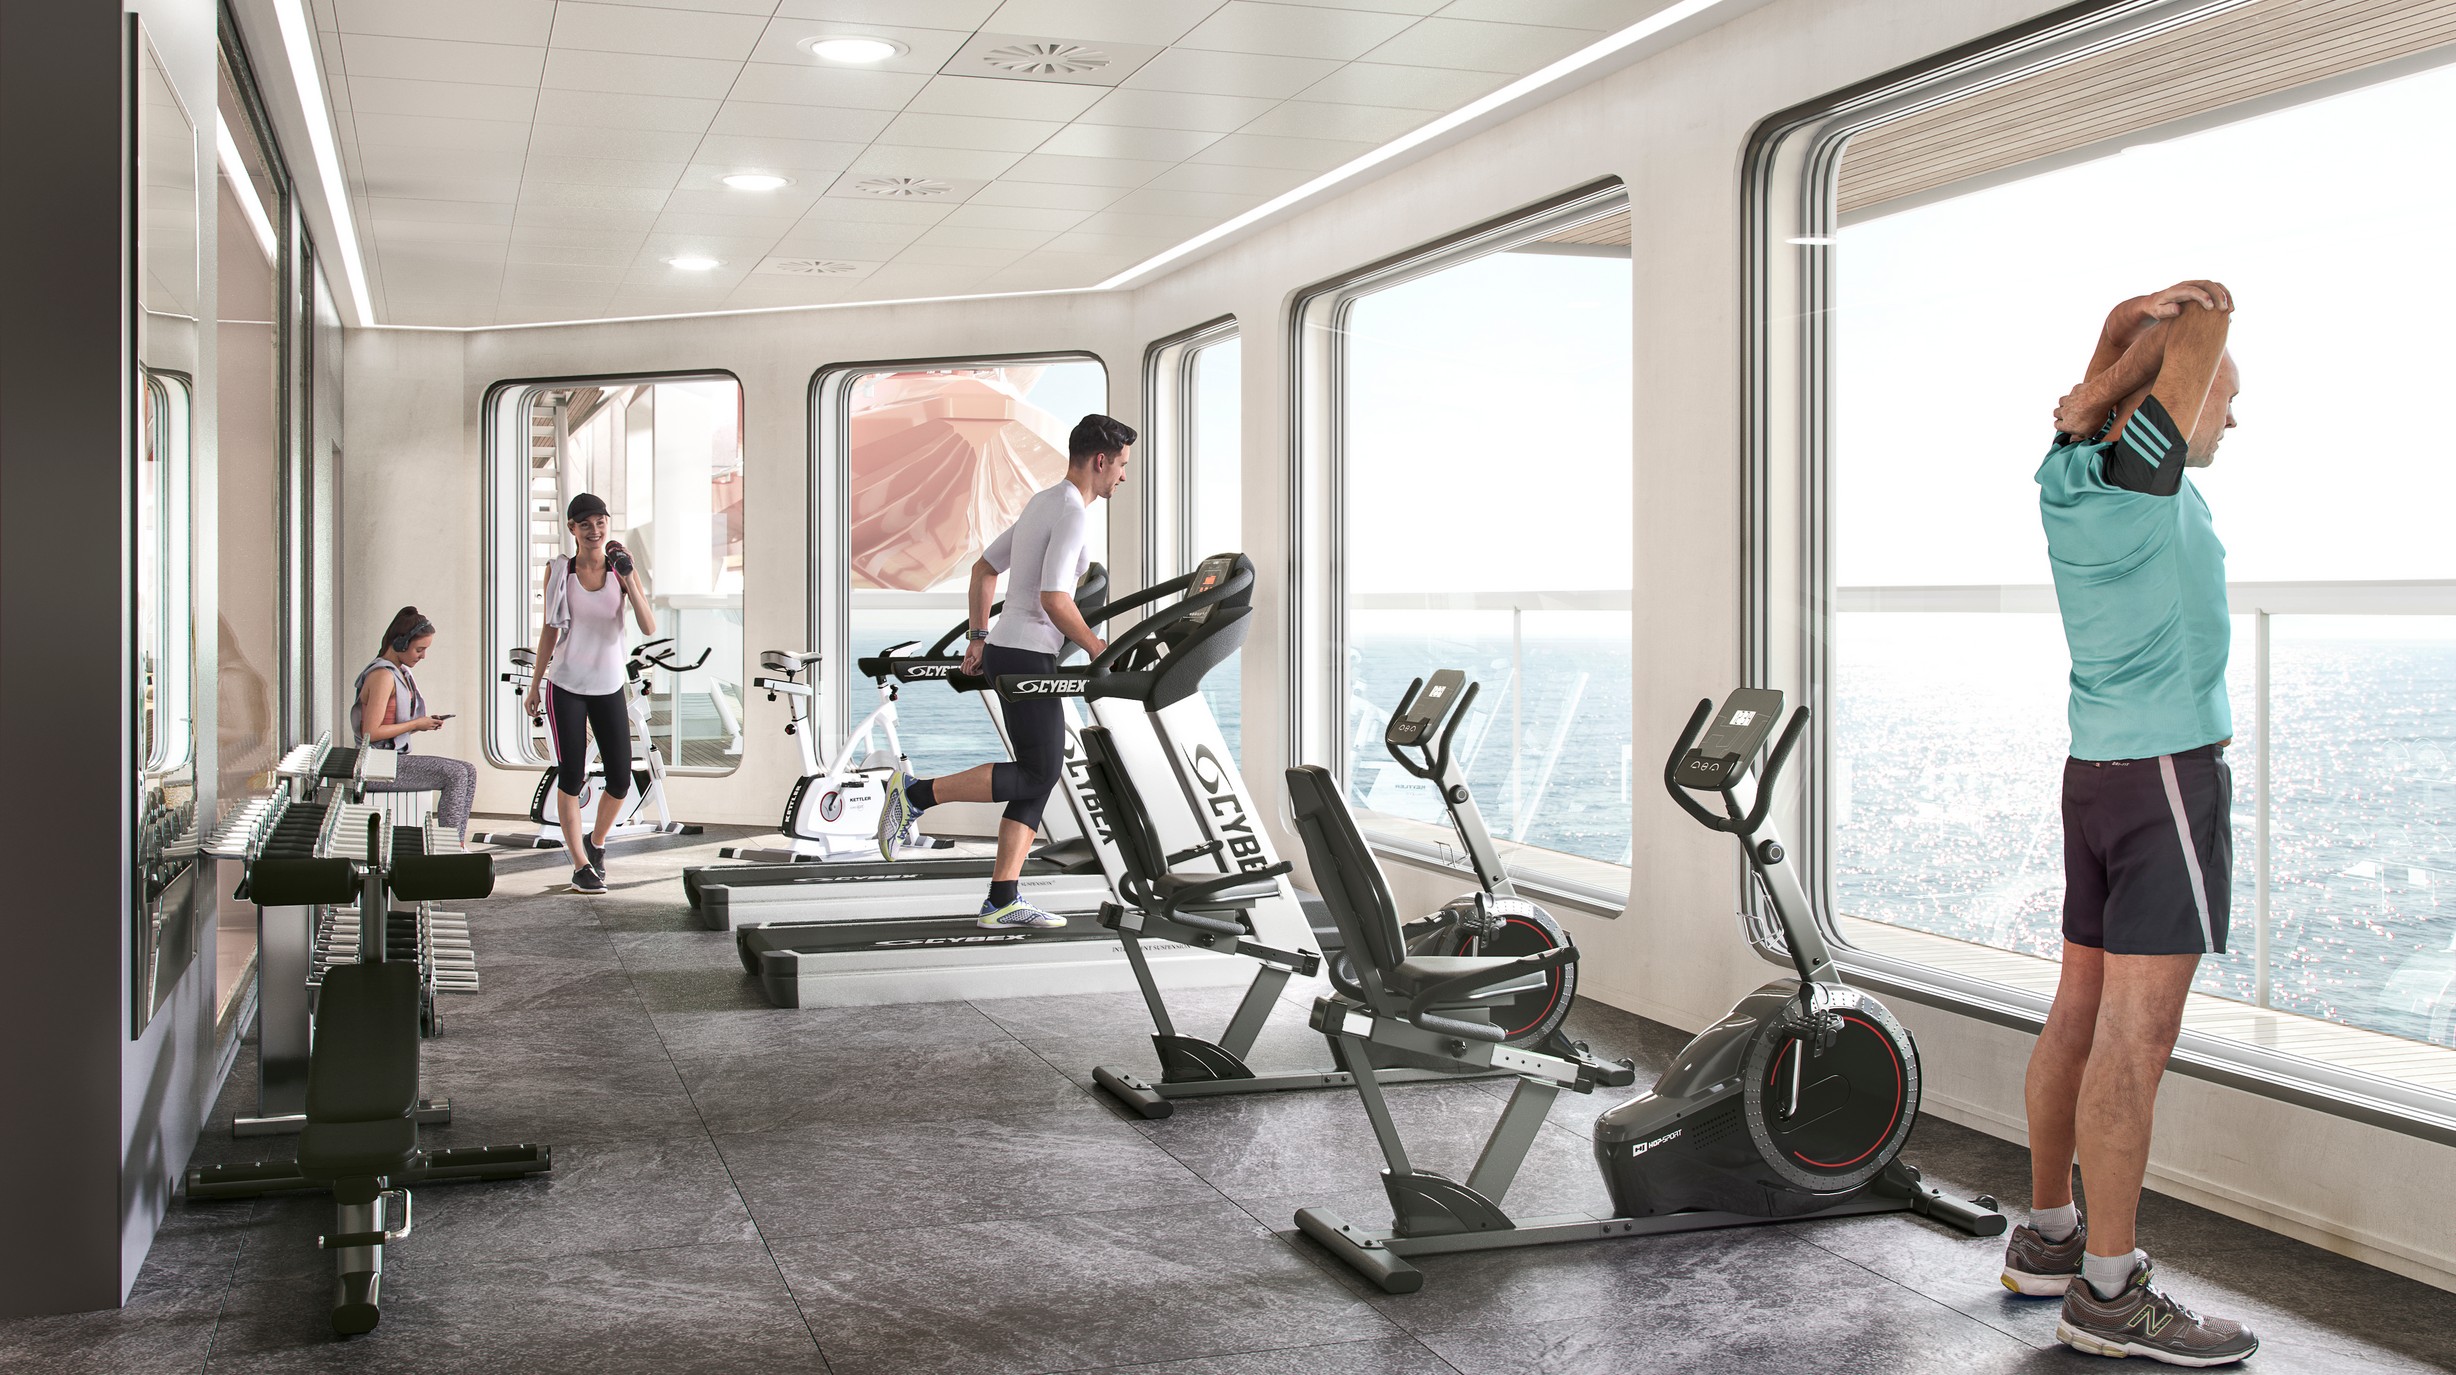 Gym with people_copyright Havila Voyages